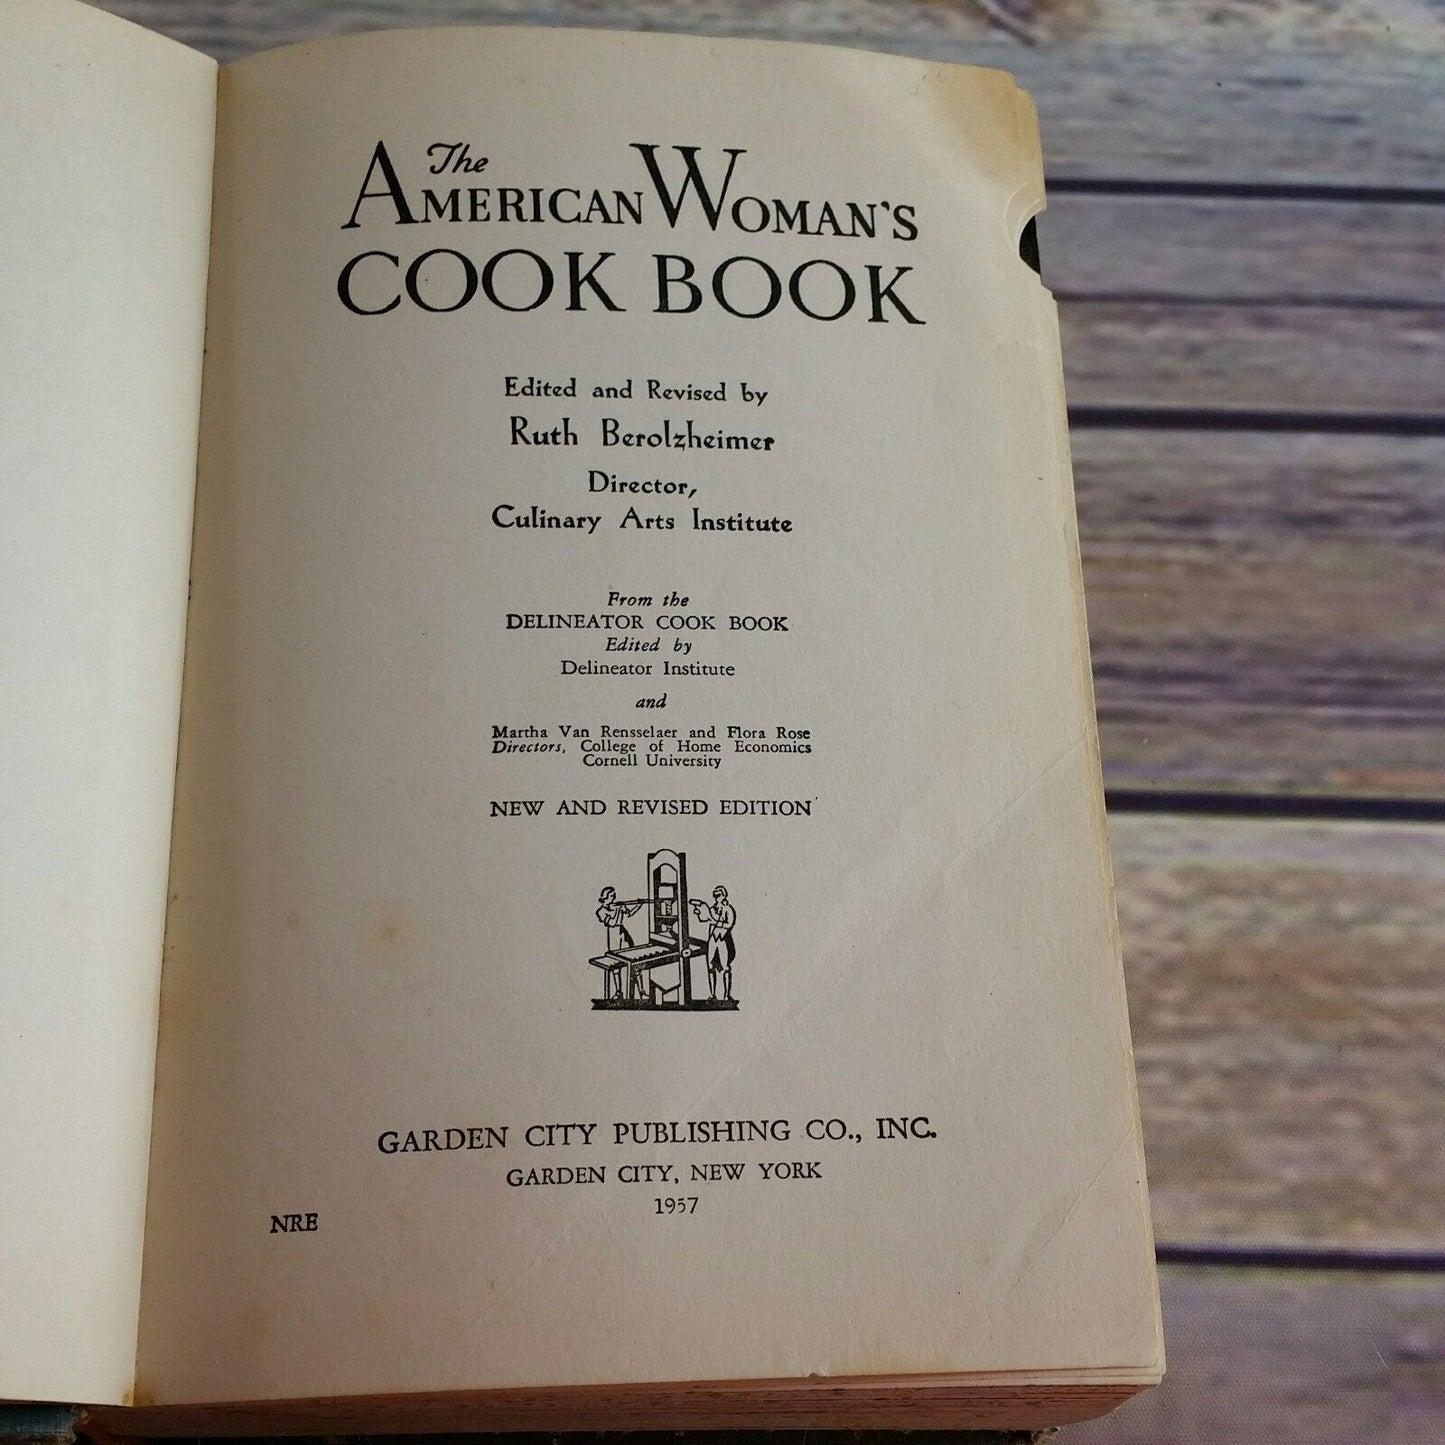 Vintage Cookbook American Womans Cook Book 1957 Ruth Berolzheimer New and Revised Garden City Publishing Hardcover NO Dust Jacket Recipes